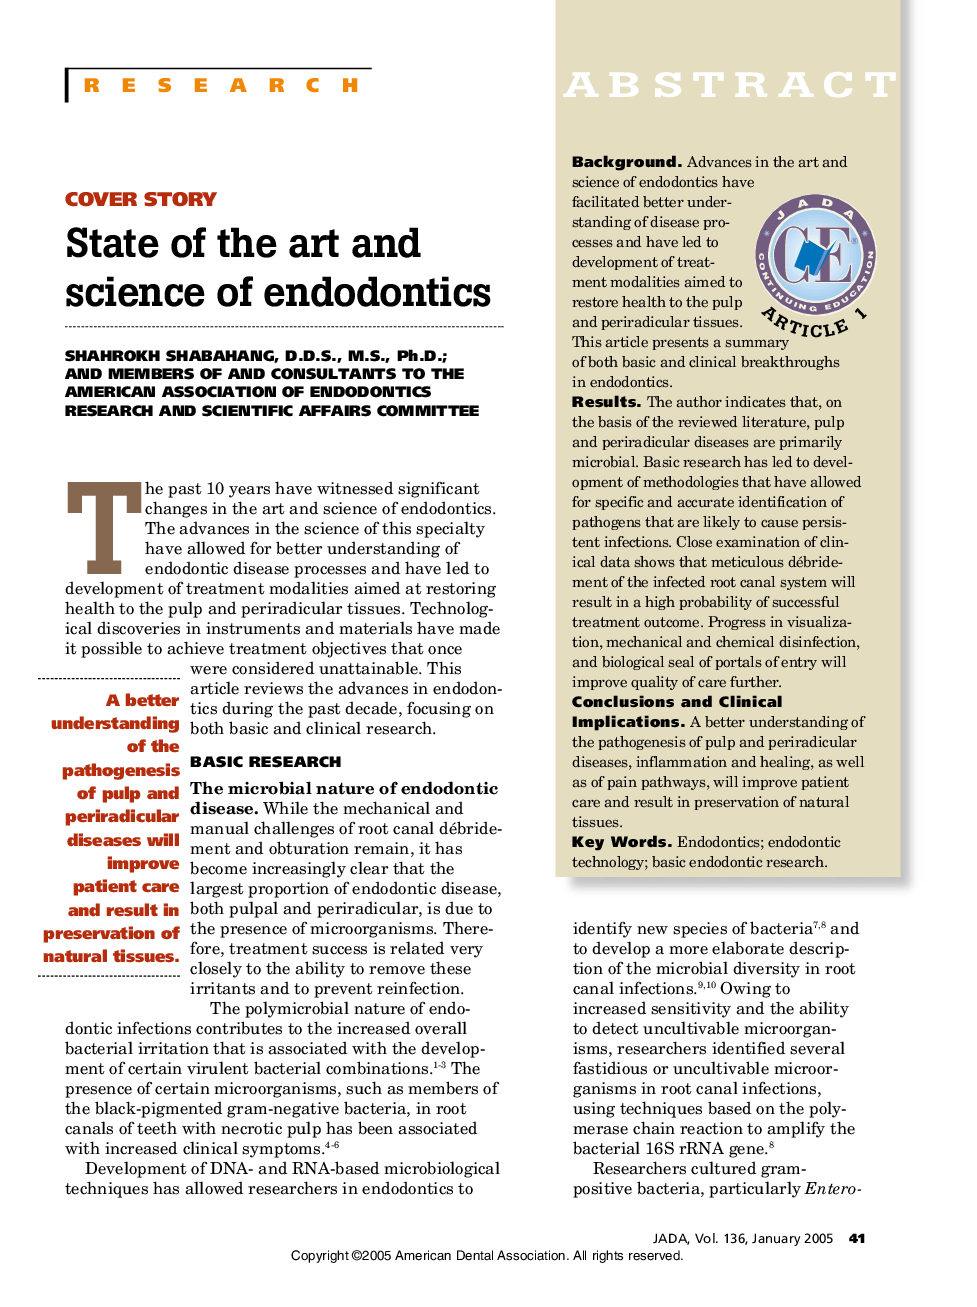 State of the art and science of endodontics